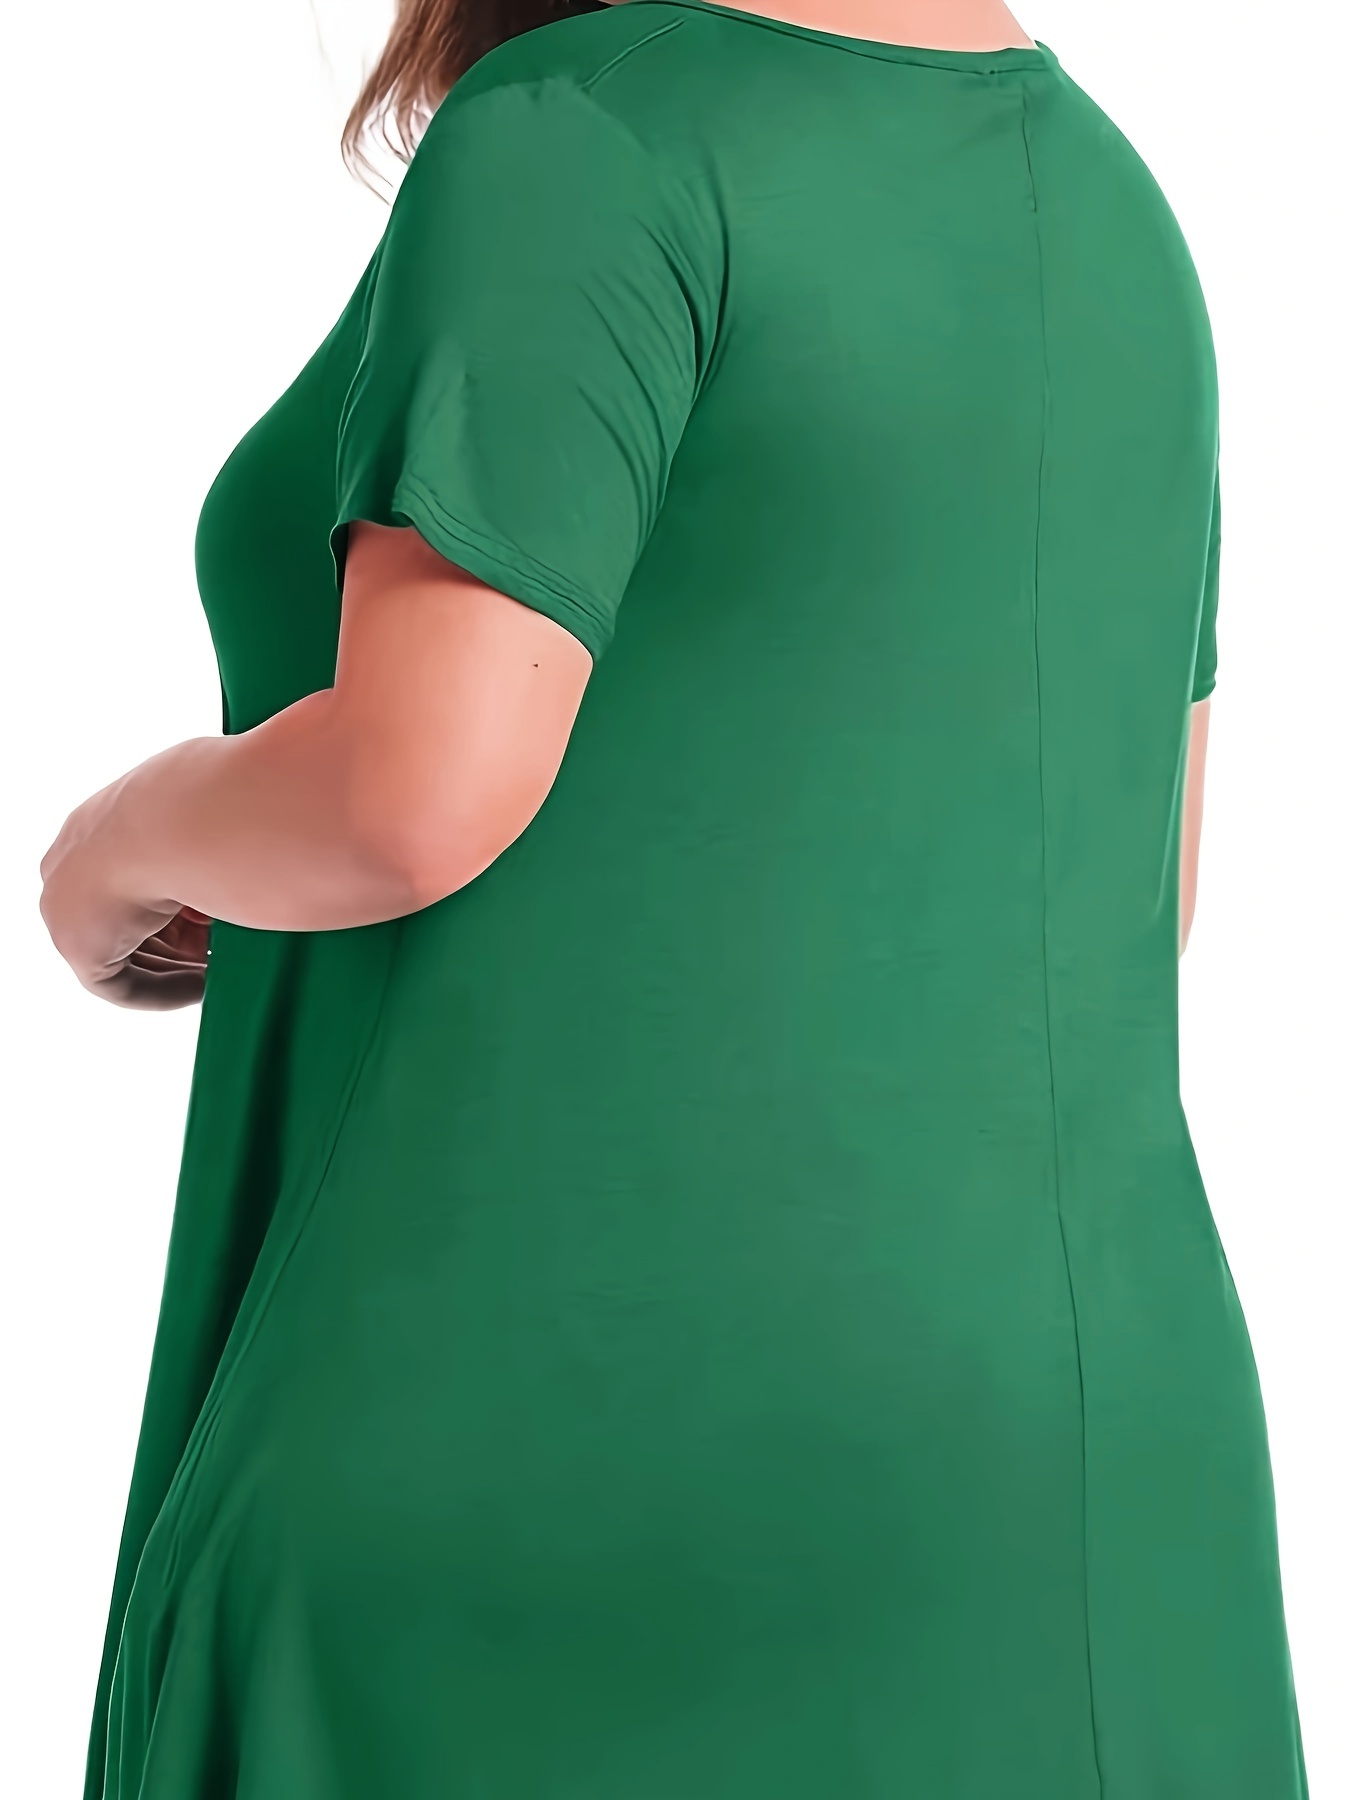 GMAYO Plus Size Clothing,Women Solid Simple Style Top 3/4 Sleeve